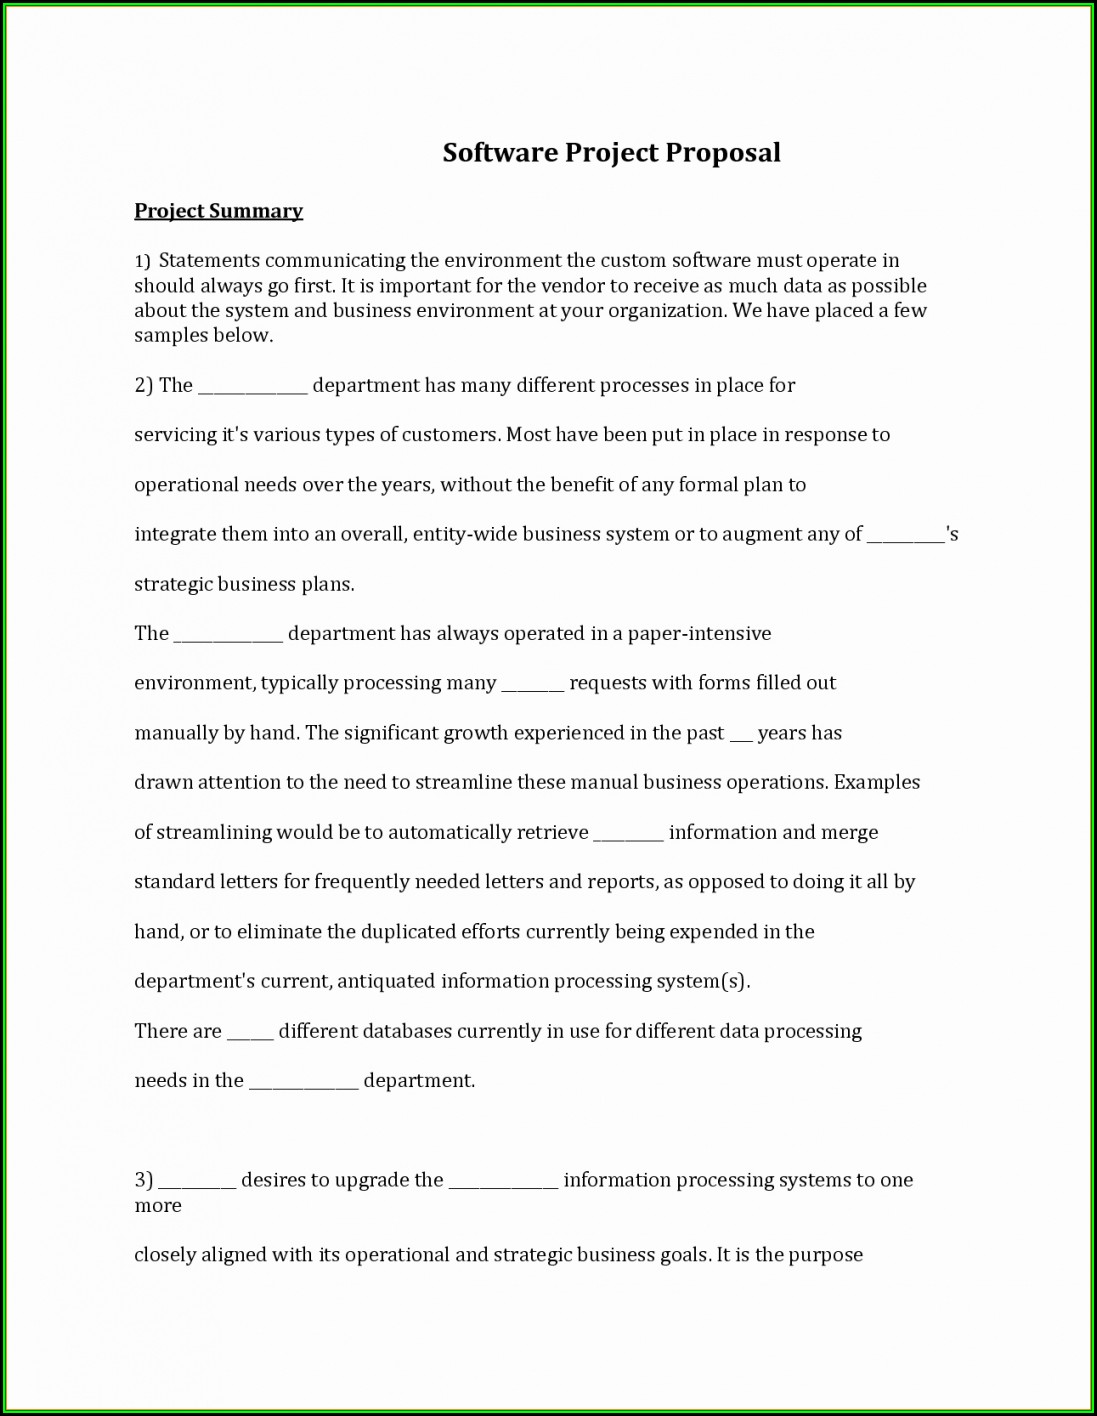 Contract Proposal Template Doc